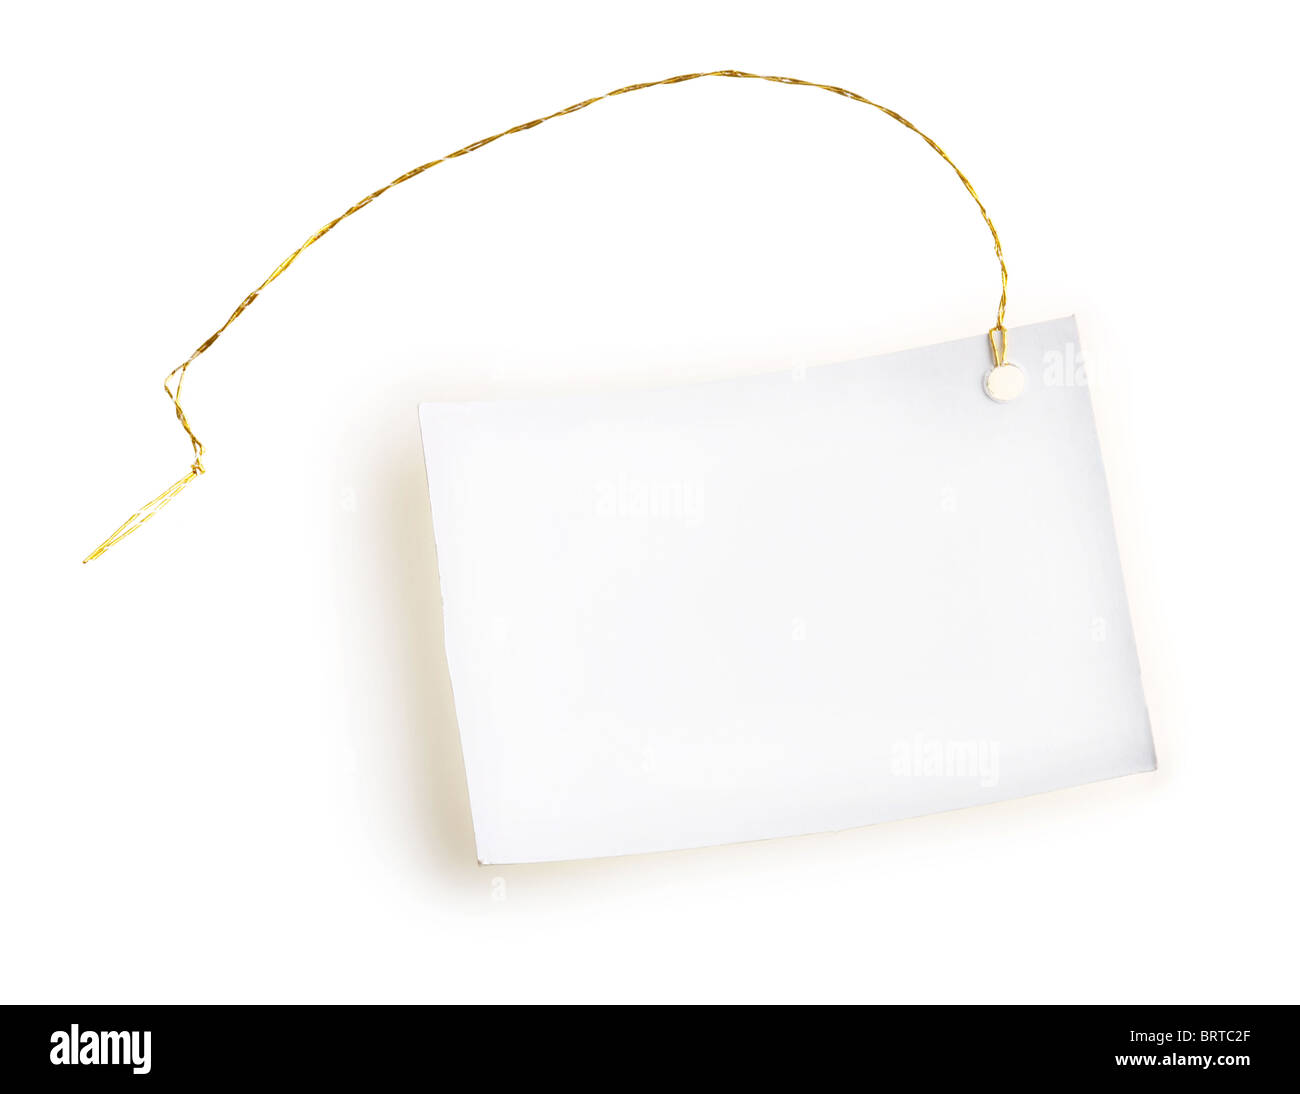 Light label with gold thread on a white background Stock Photo